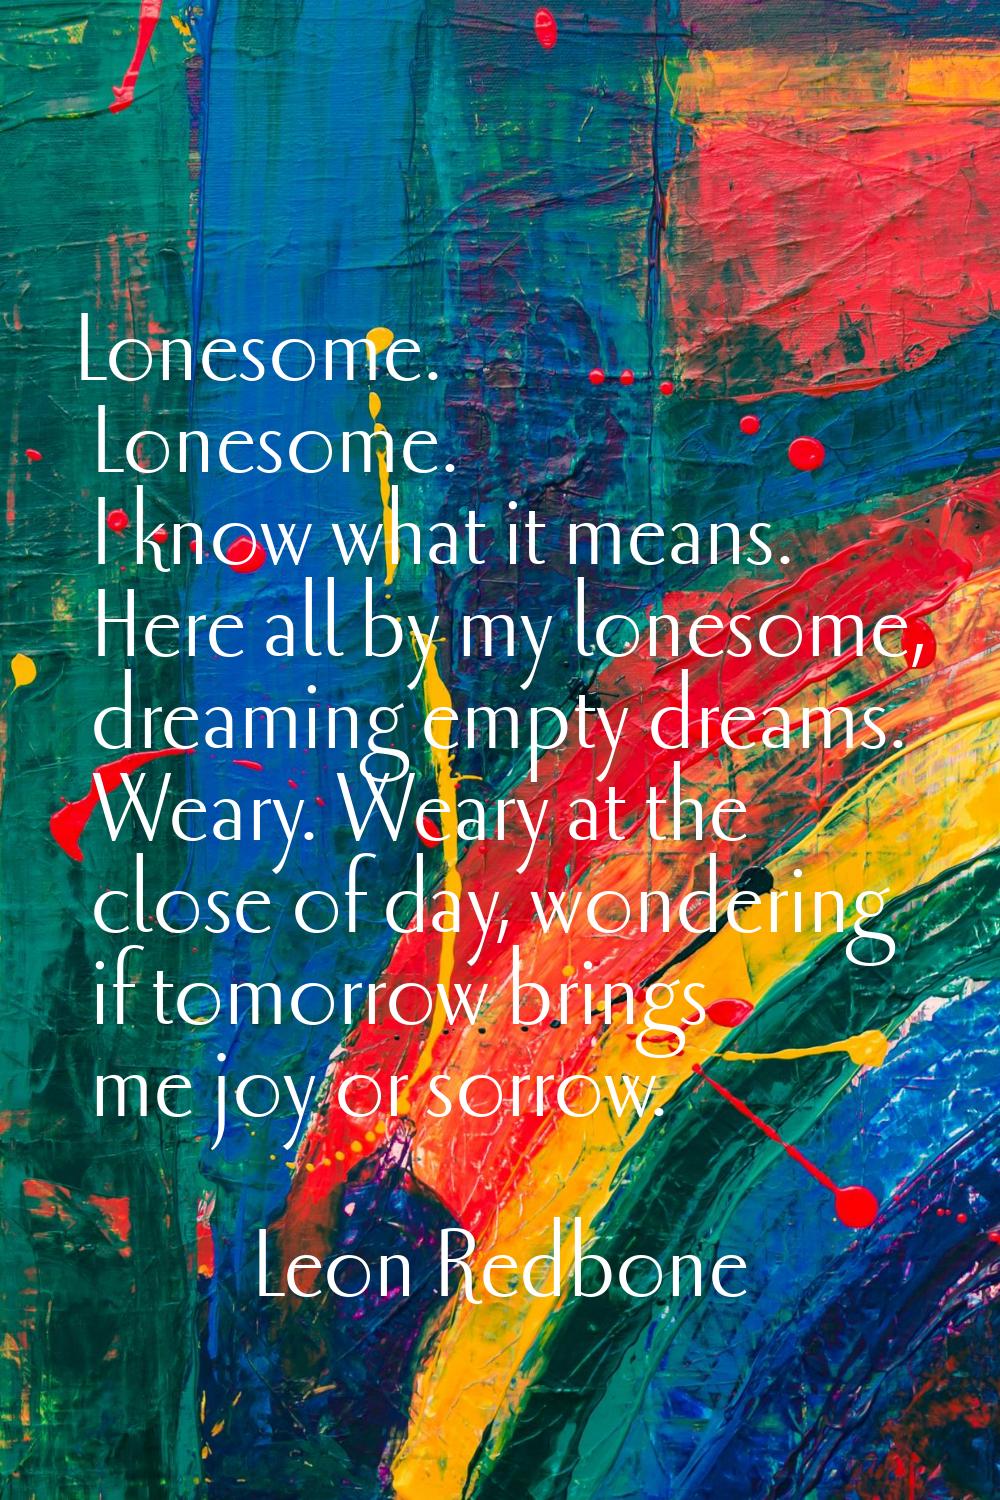 Lonesome. Lonesome. I know what it means. Here all by my lonesome, dreaming empty dreams. Weary. We